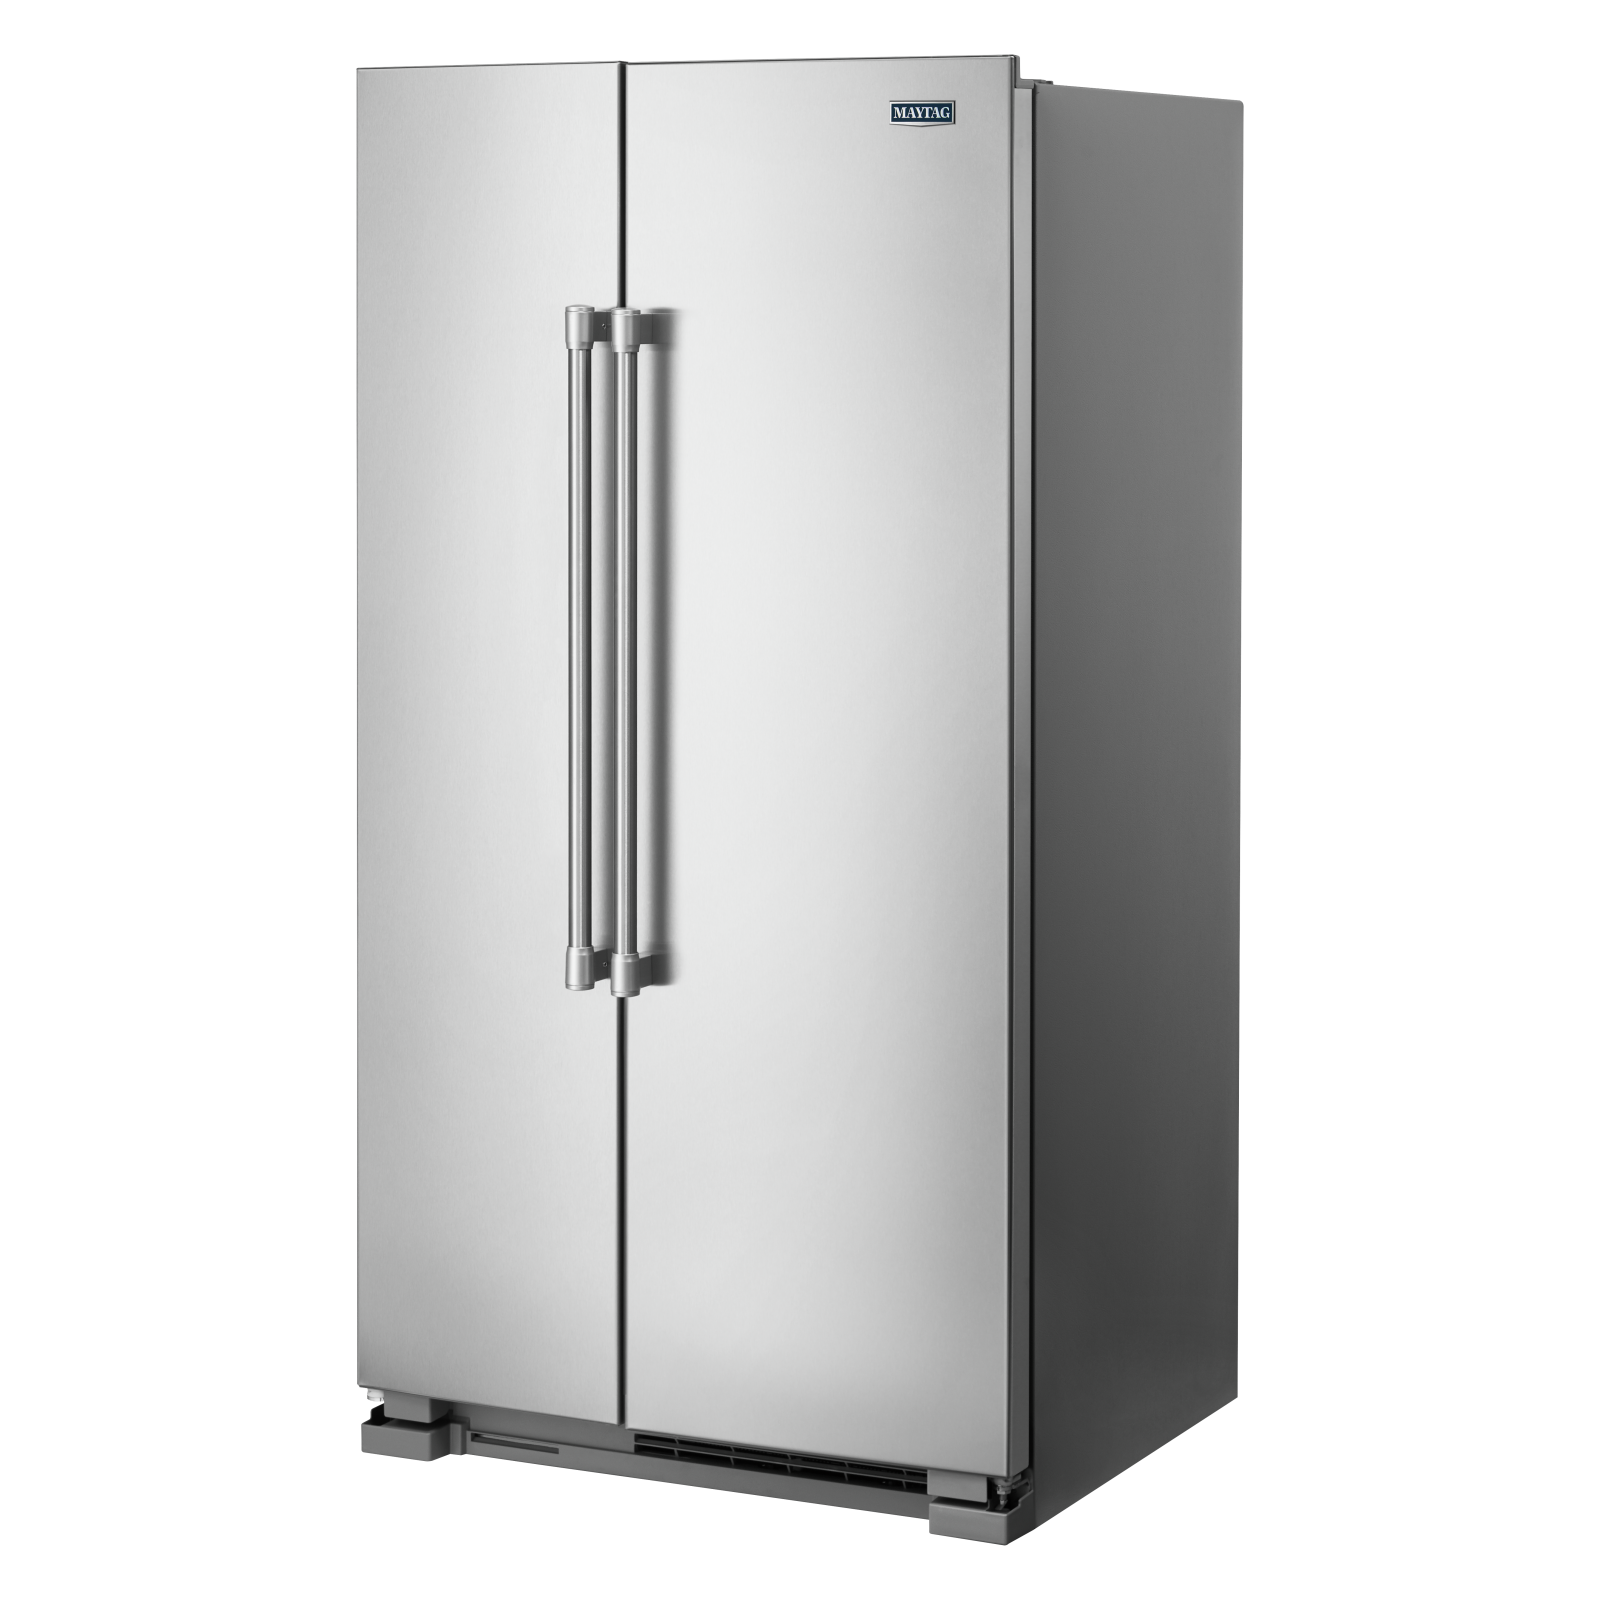 Maytag - 35.875 Inch 24.9 cu. ft Side by Side Refrigerator in Stainless - MSS25N4MKZ